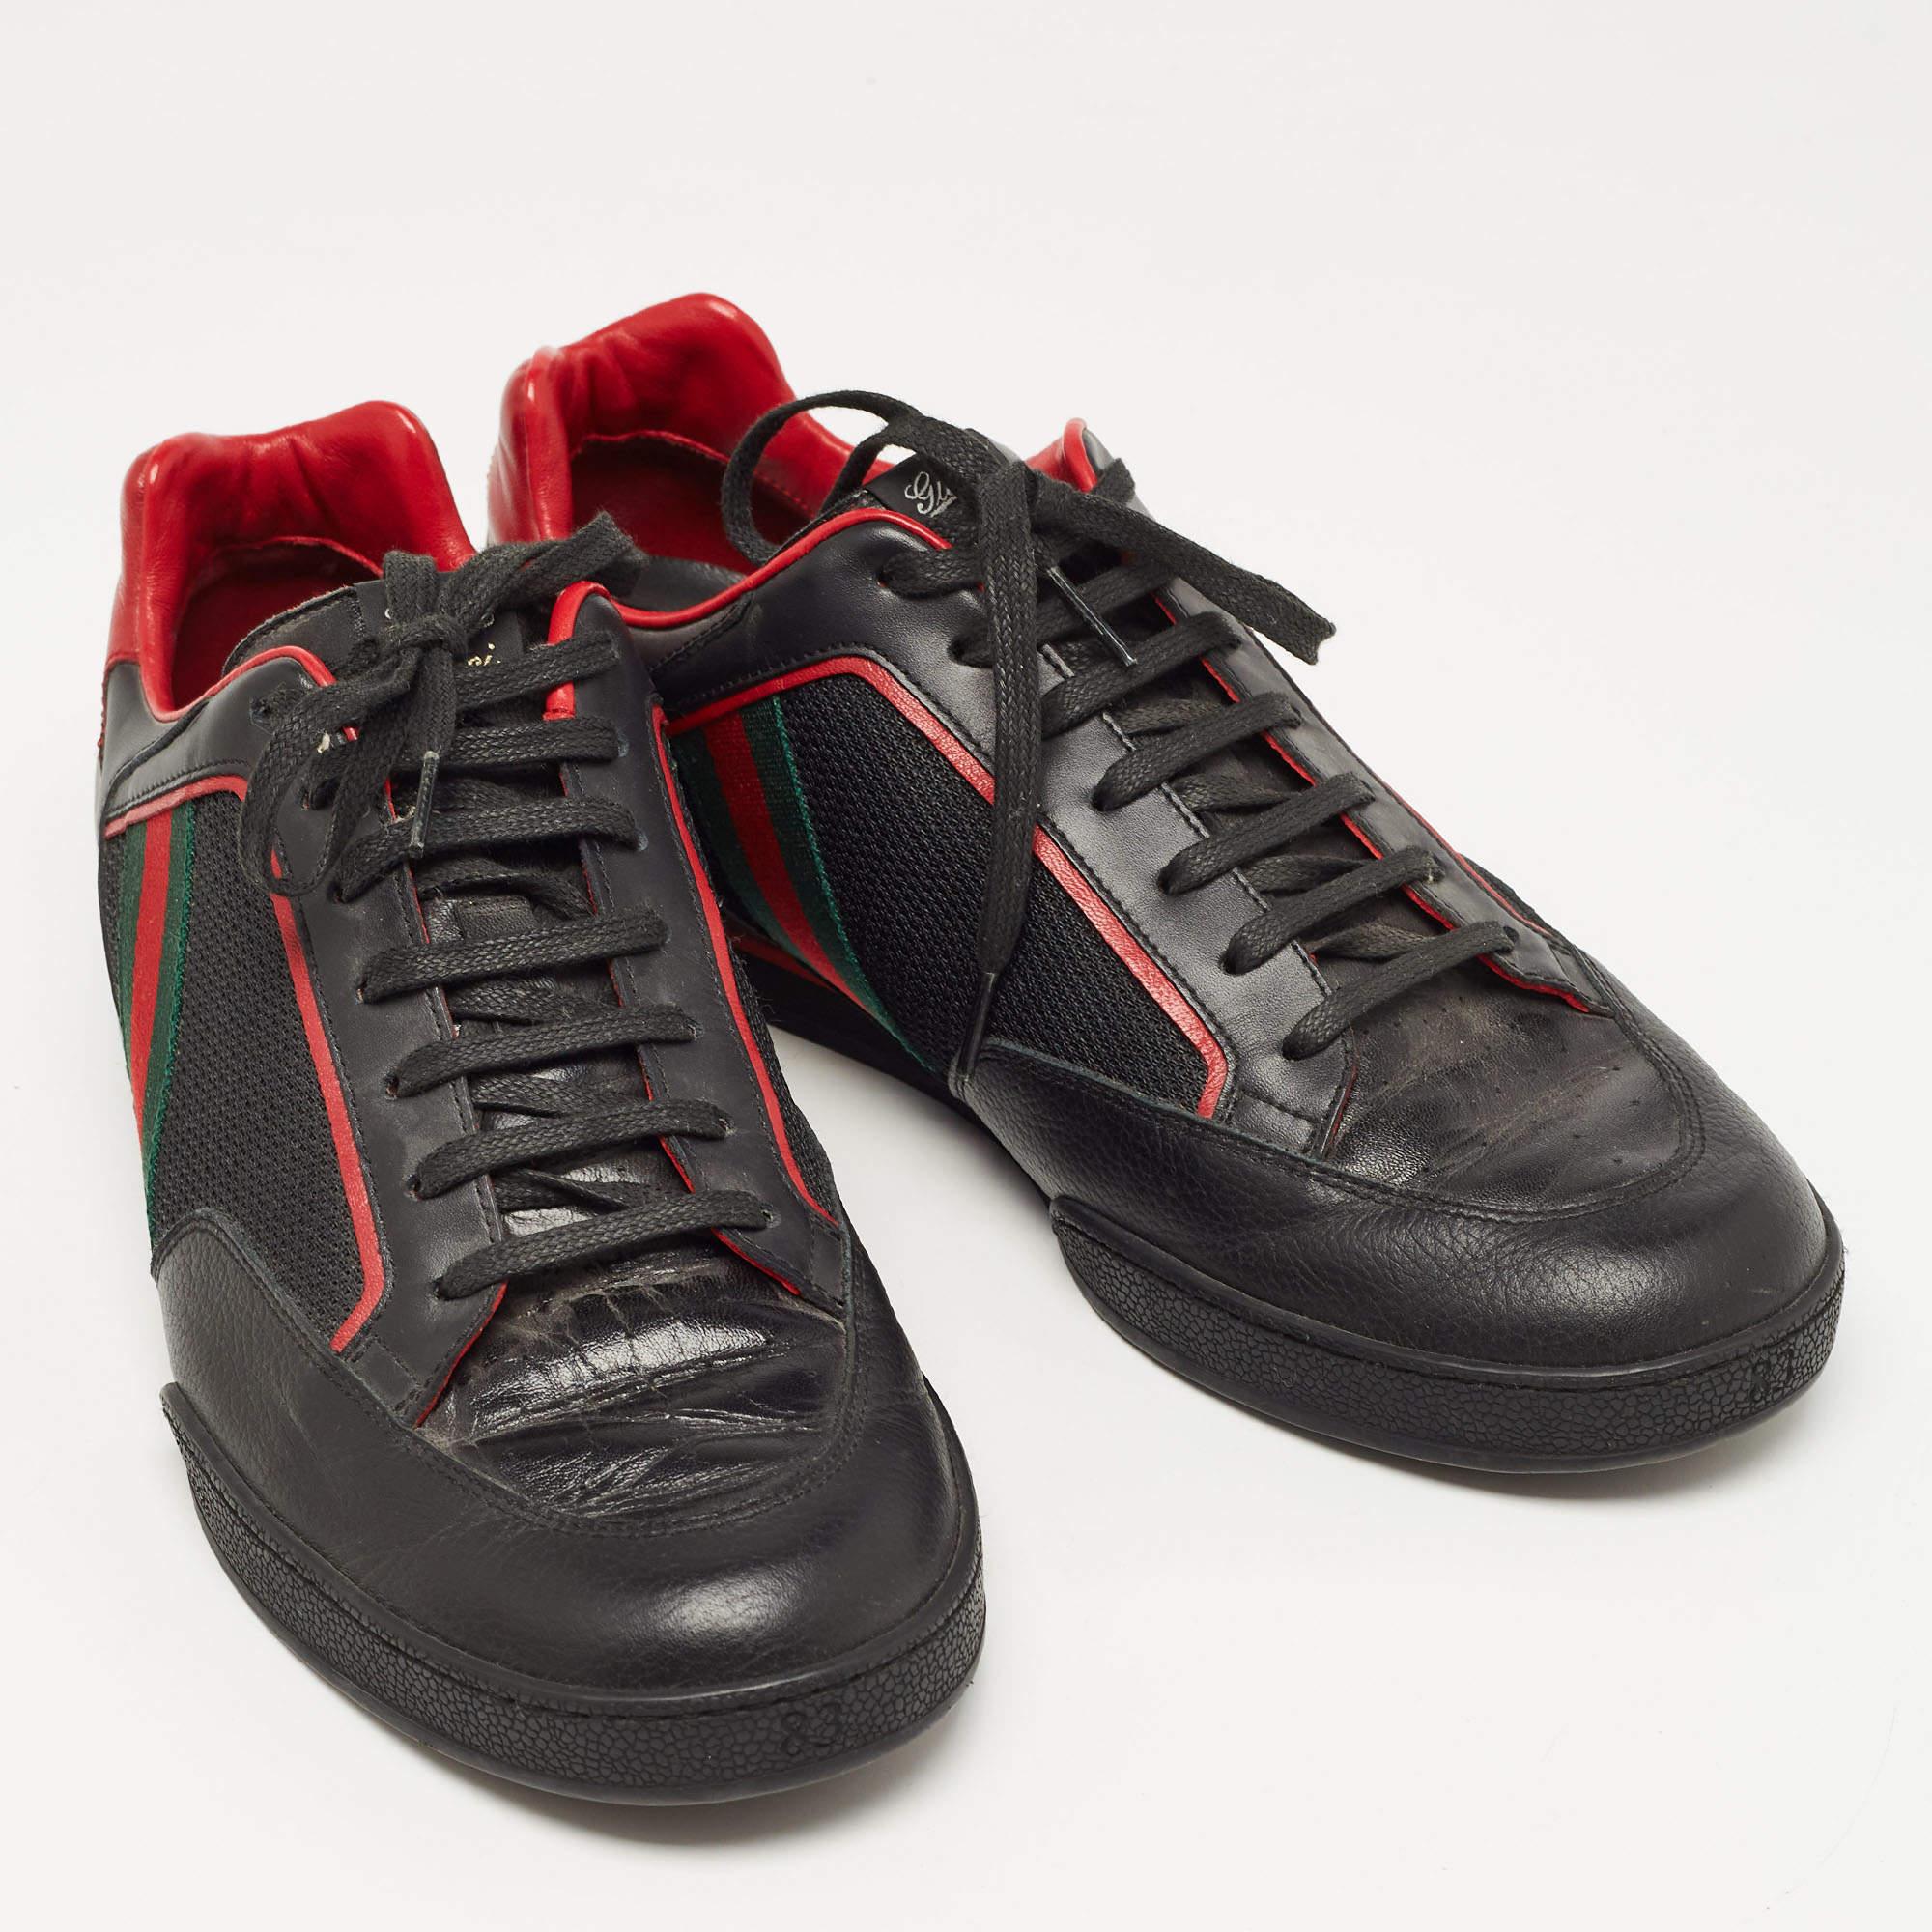 Gucci Black/Red Leather and Mesh Vintage Tennis Sneakers Size 43.5 In Good Condition For Sale In Dubai, Al Qouz 2